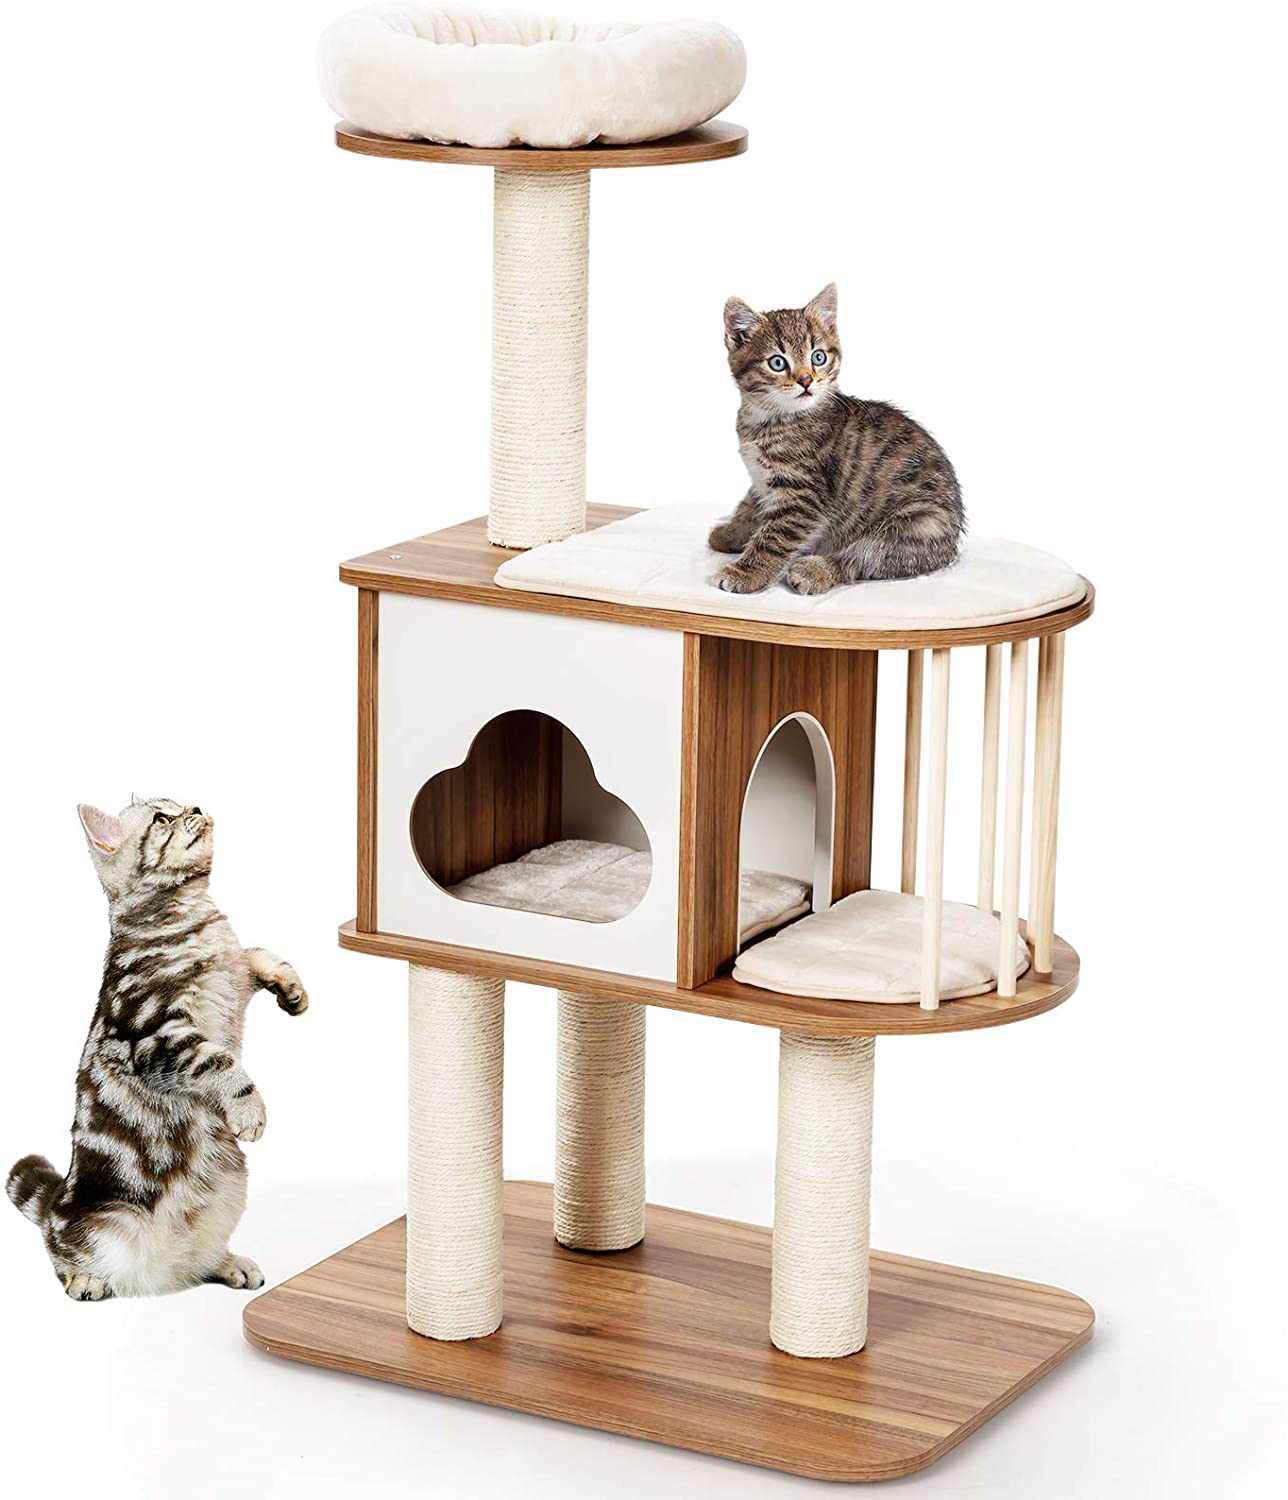 Tangkula Modern Wood Cat Tree, 46 Inches Cat Tower with Platform, Cat Activity Center with Scratching Posts and Washable Cushions, Wooden Cat Condo Furniture for Kittens and Cats